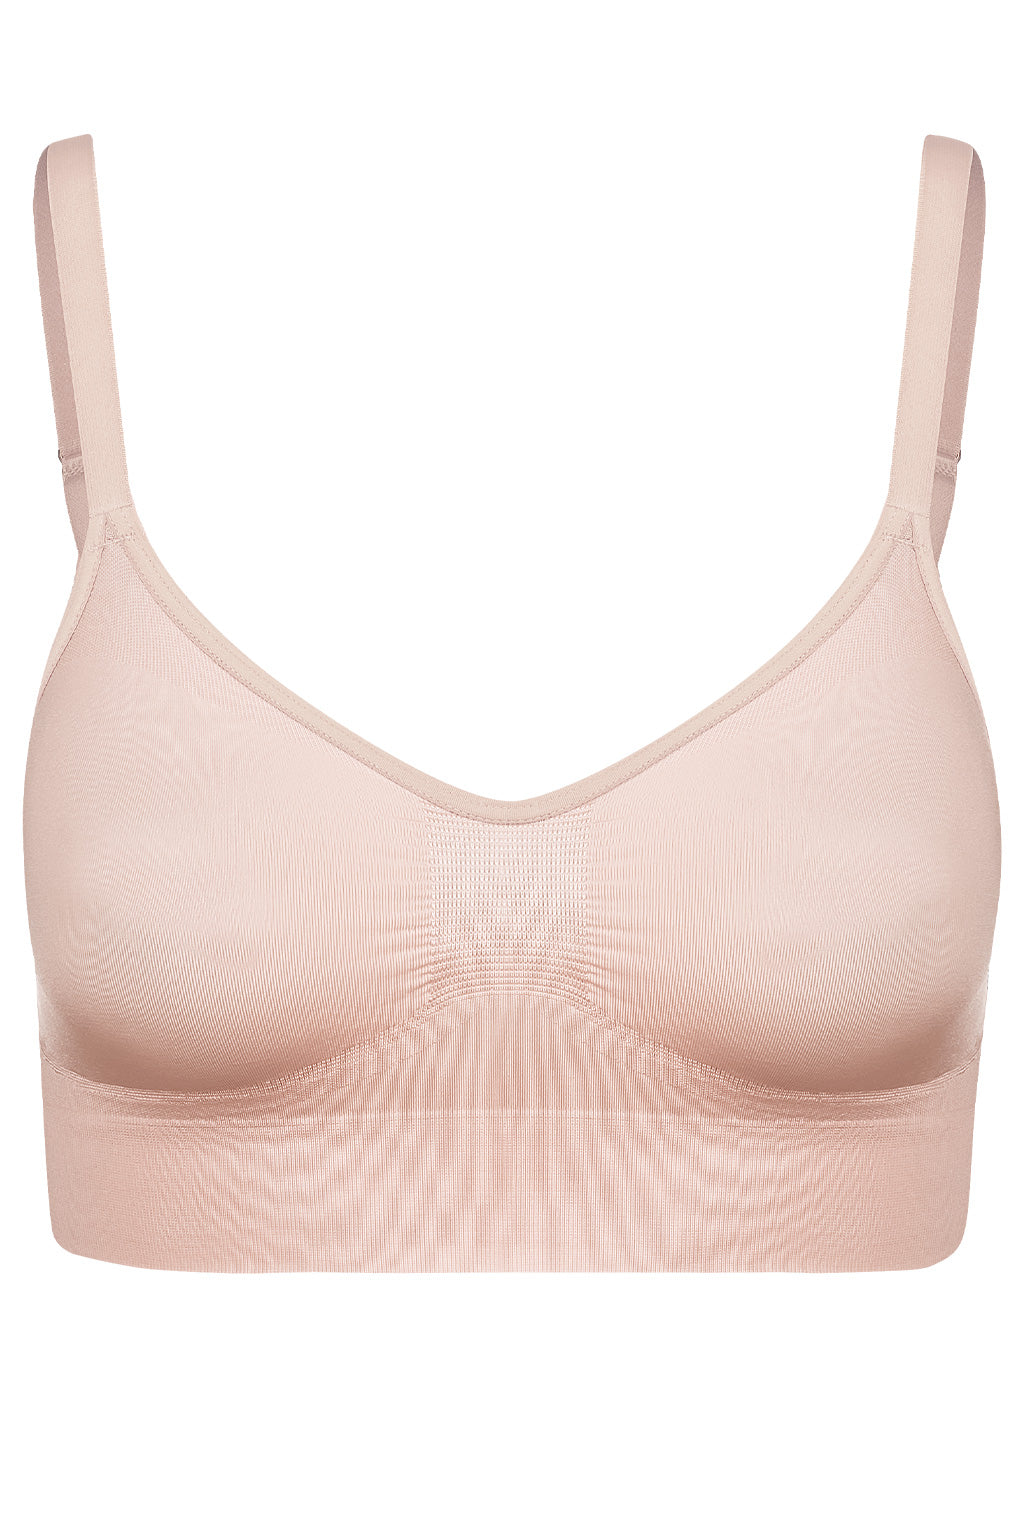 The Costco Connection - Bra-makers Supply the leading global source for bra  making and corset making supplies